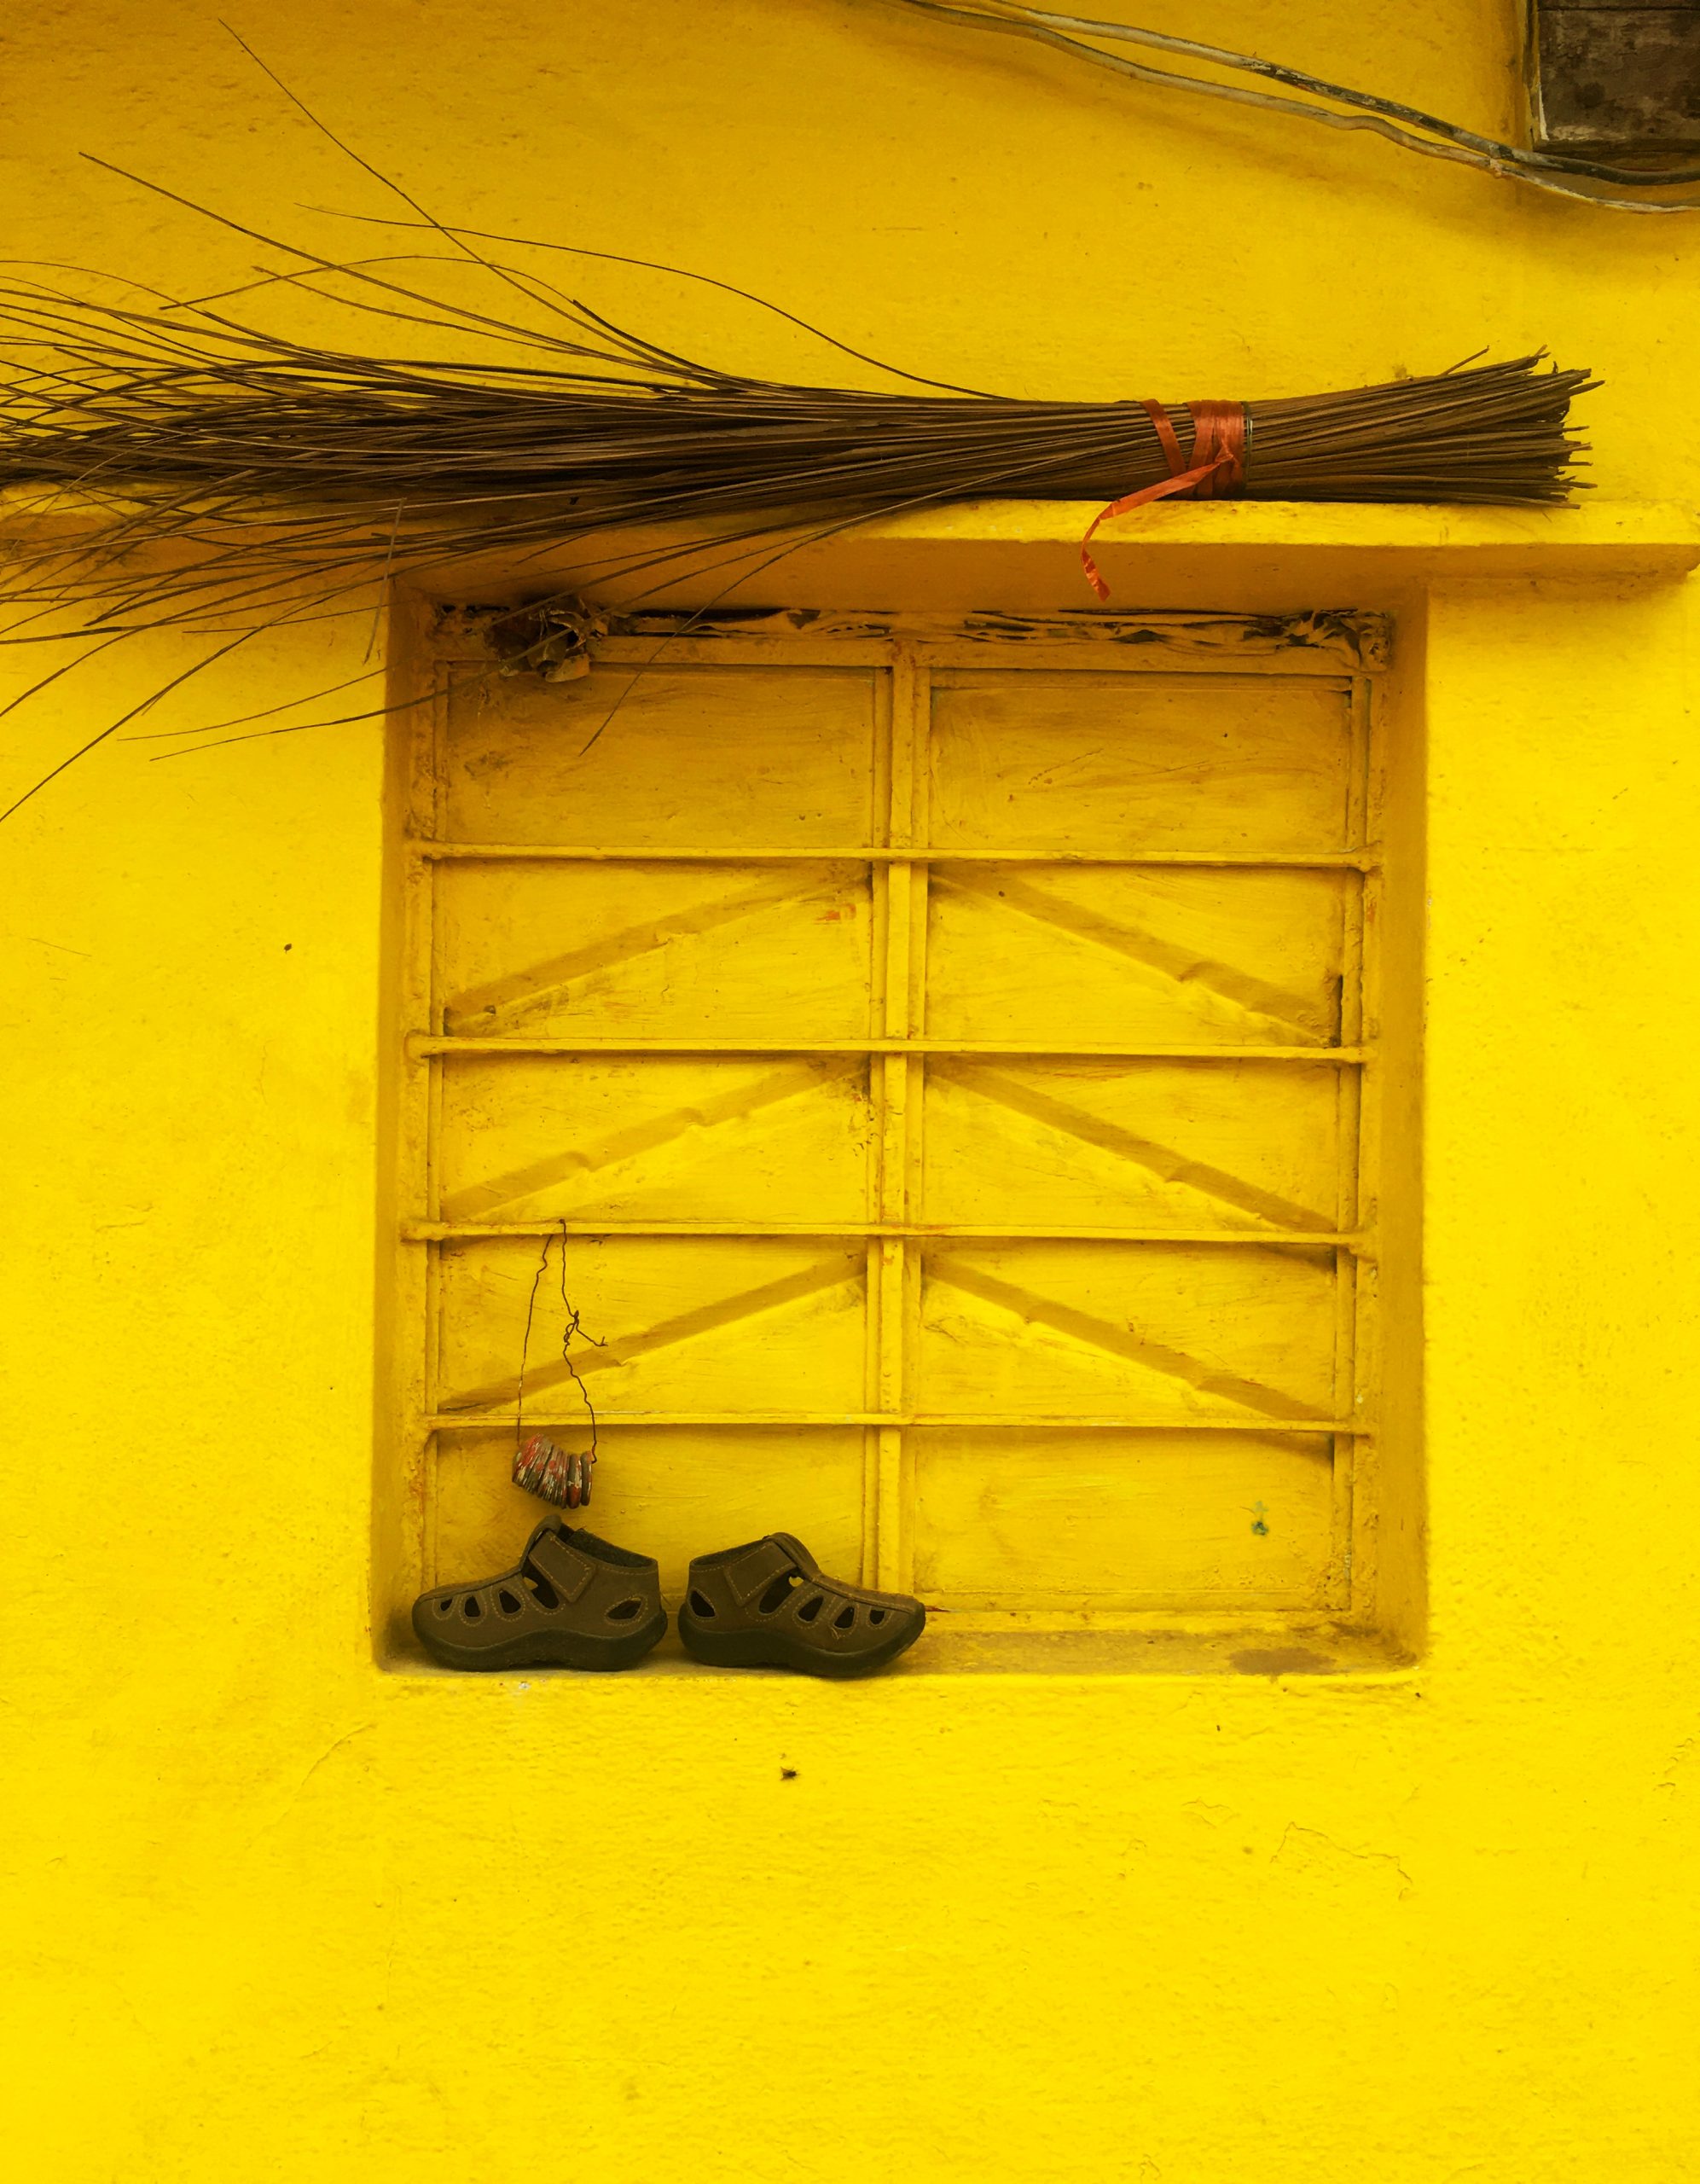 Window of a rural house